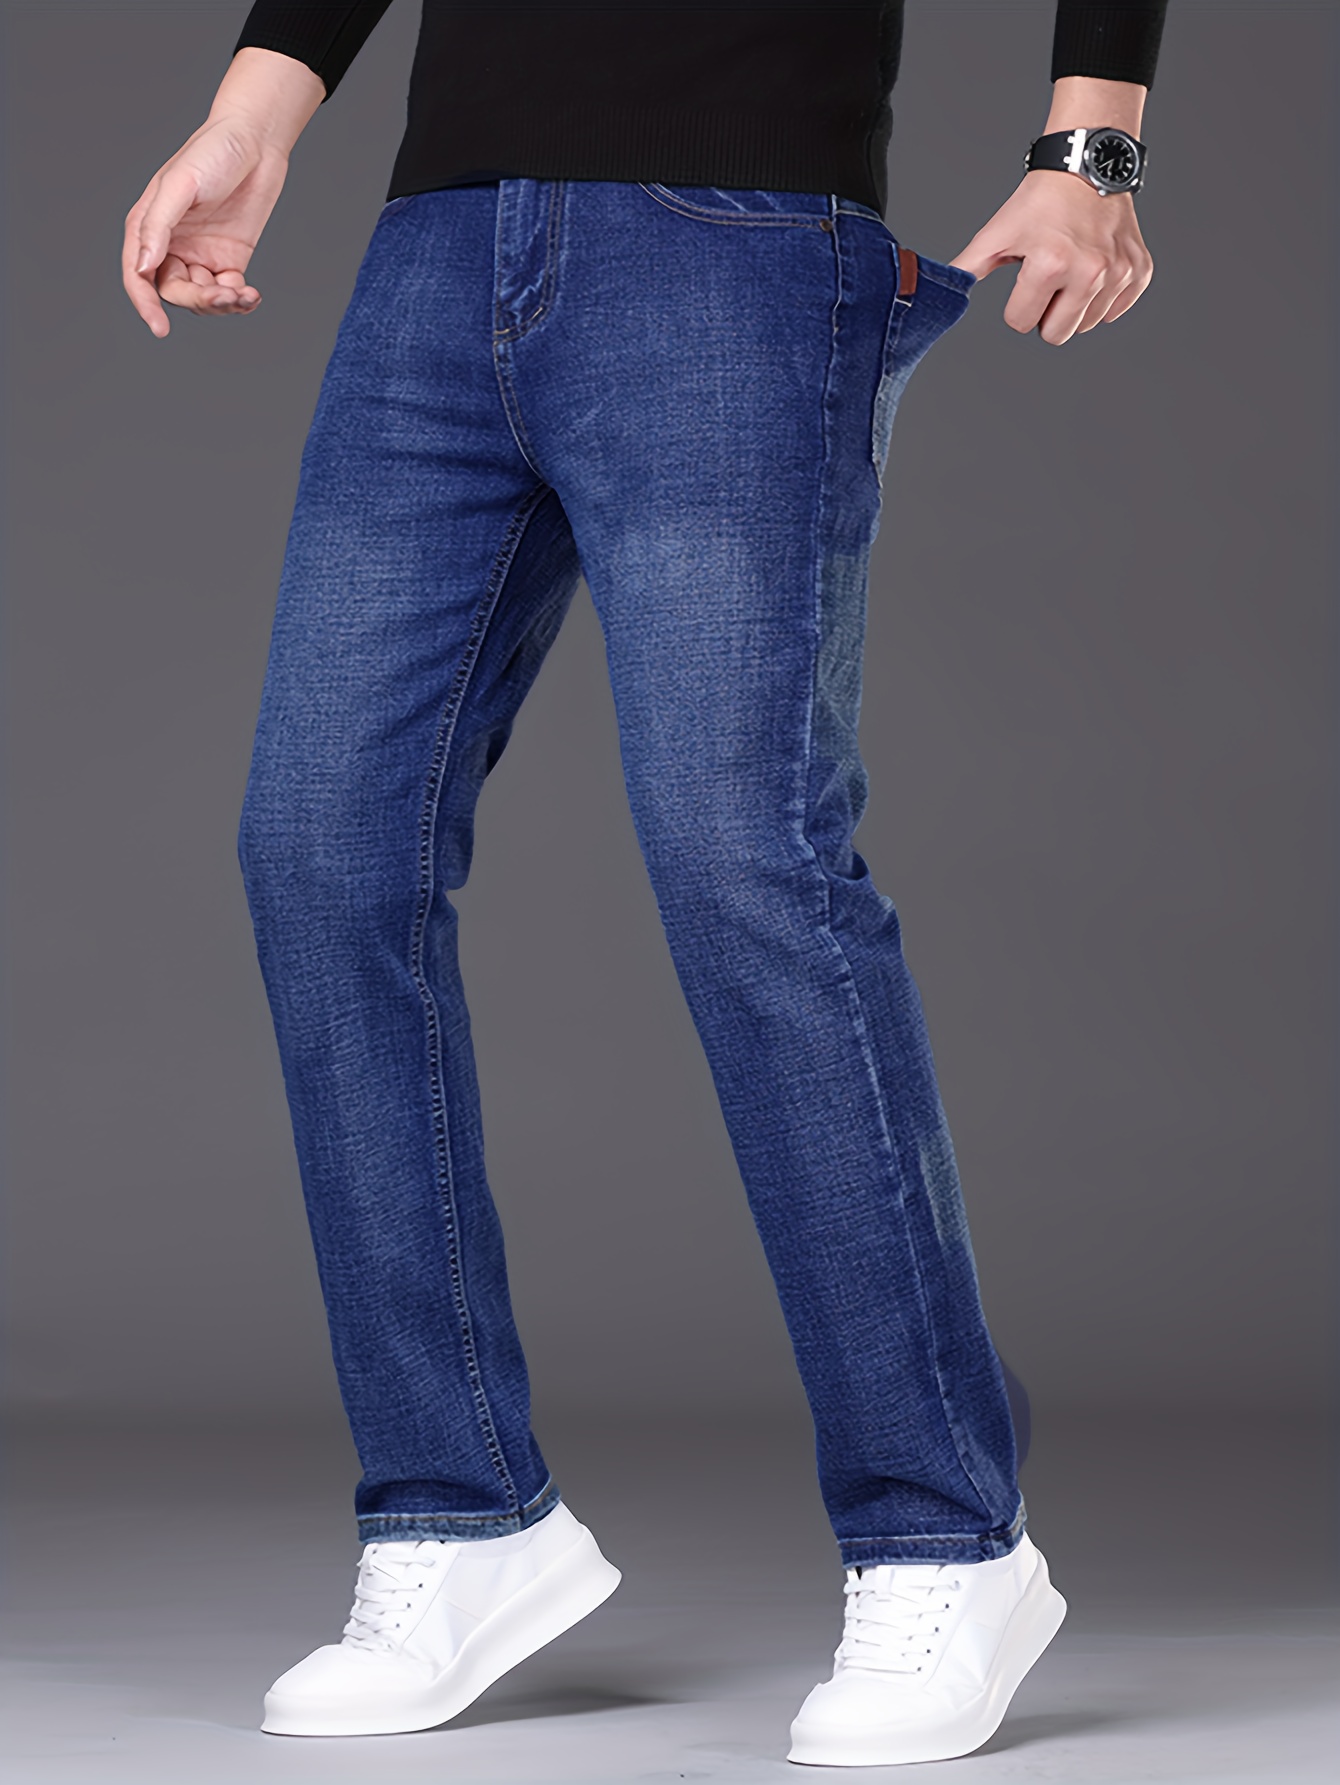 Classic Design Semi-formal Jeans, Men's Casual Stretch Denim Pants For All  Seasons Business